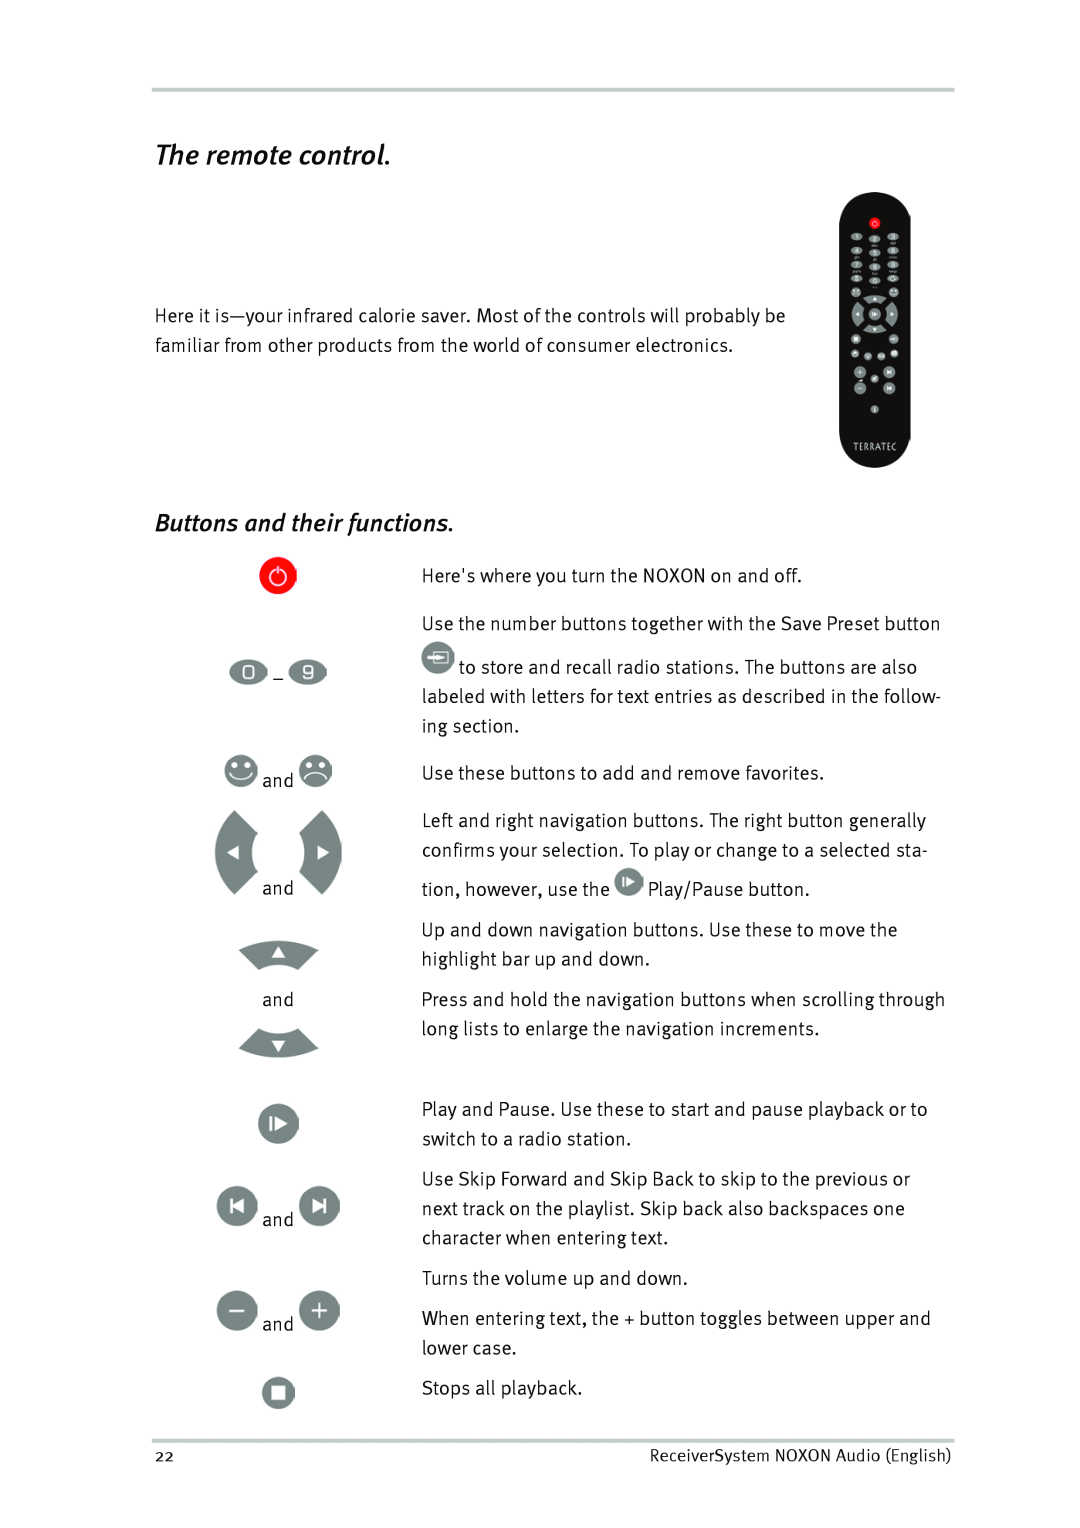 TerraTec Audio manual The remote control, Buttons and their functions 